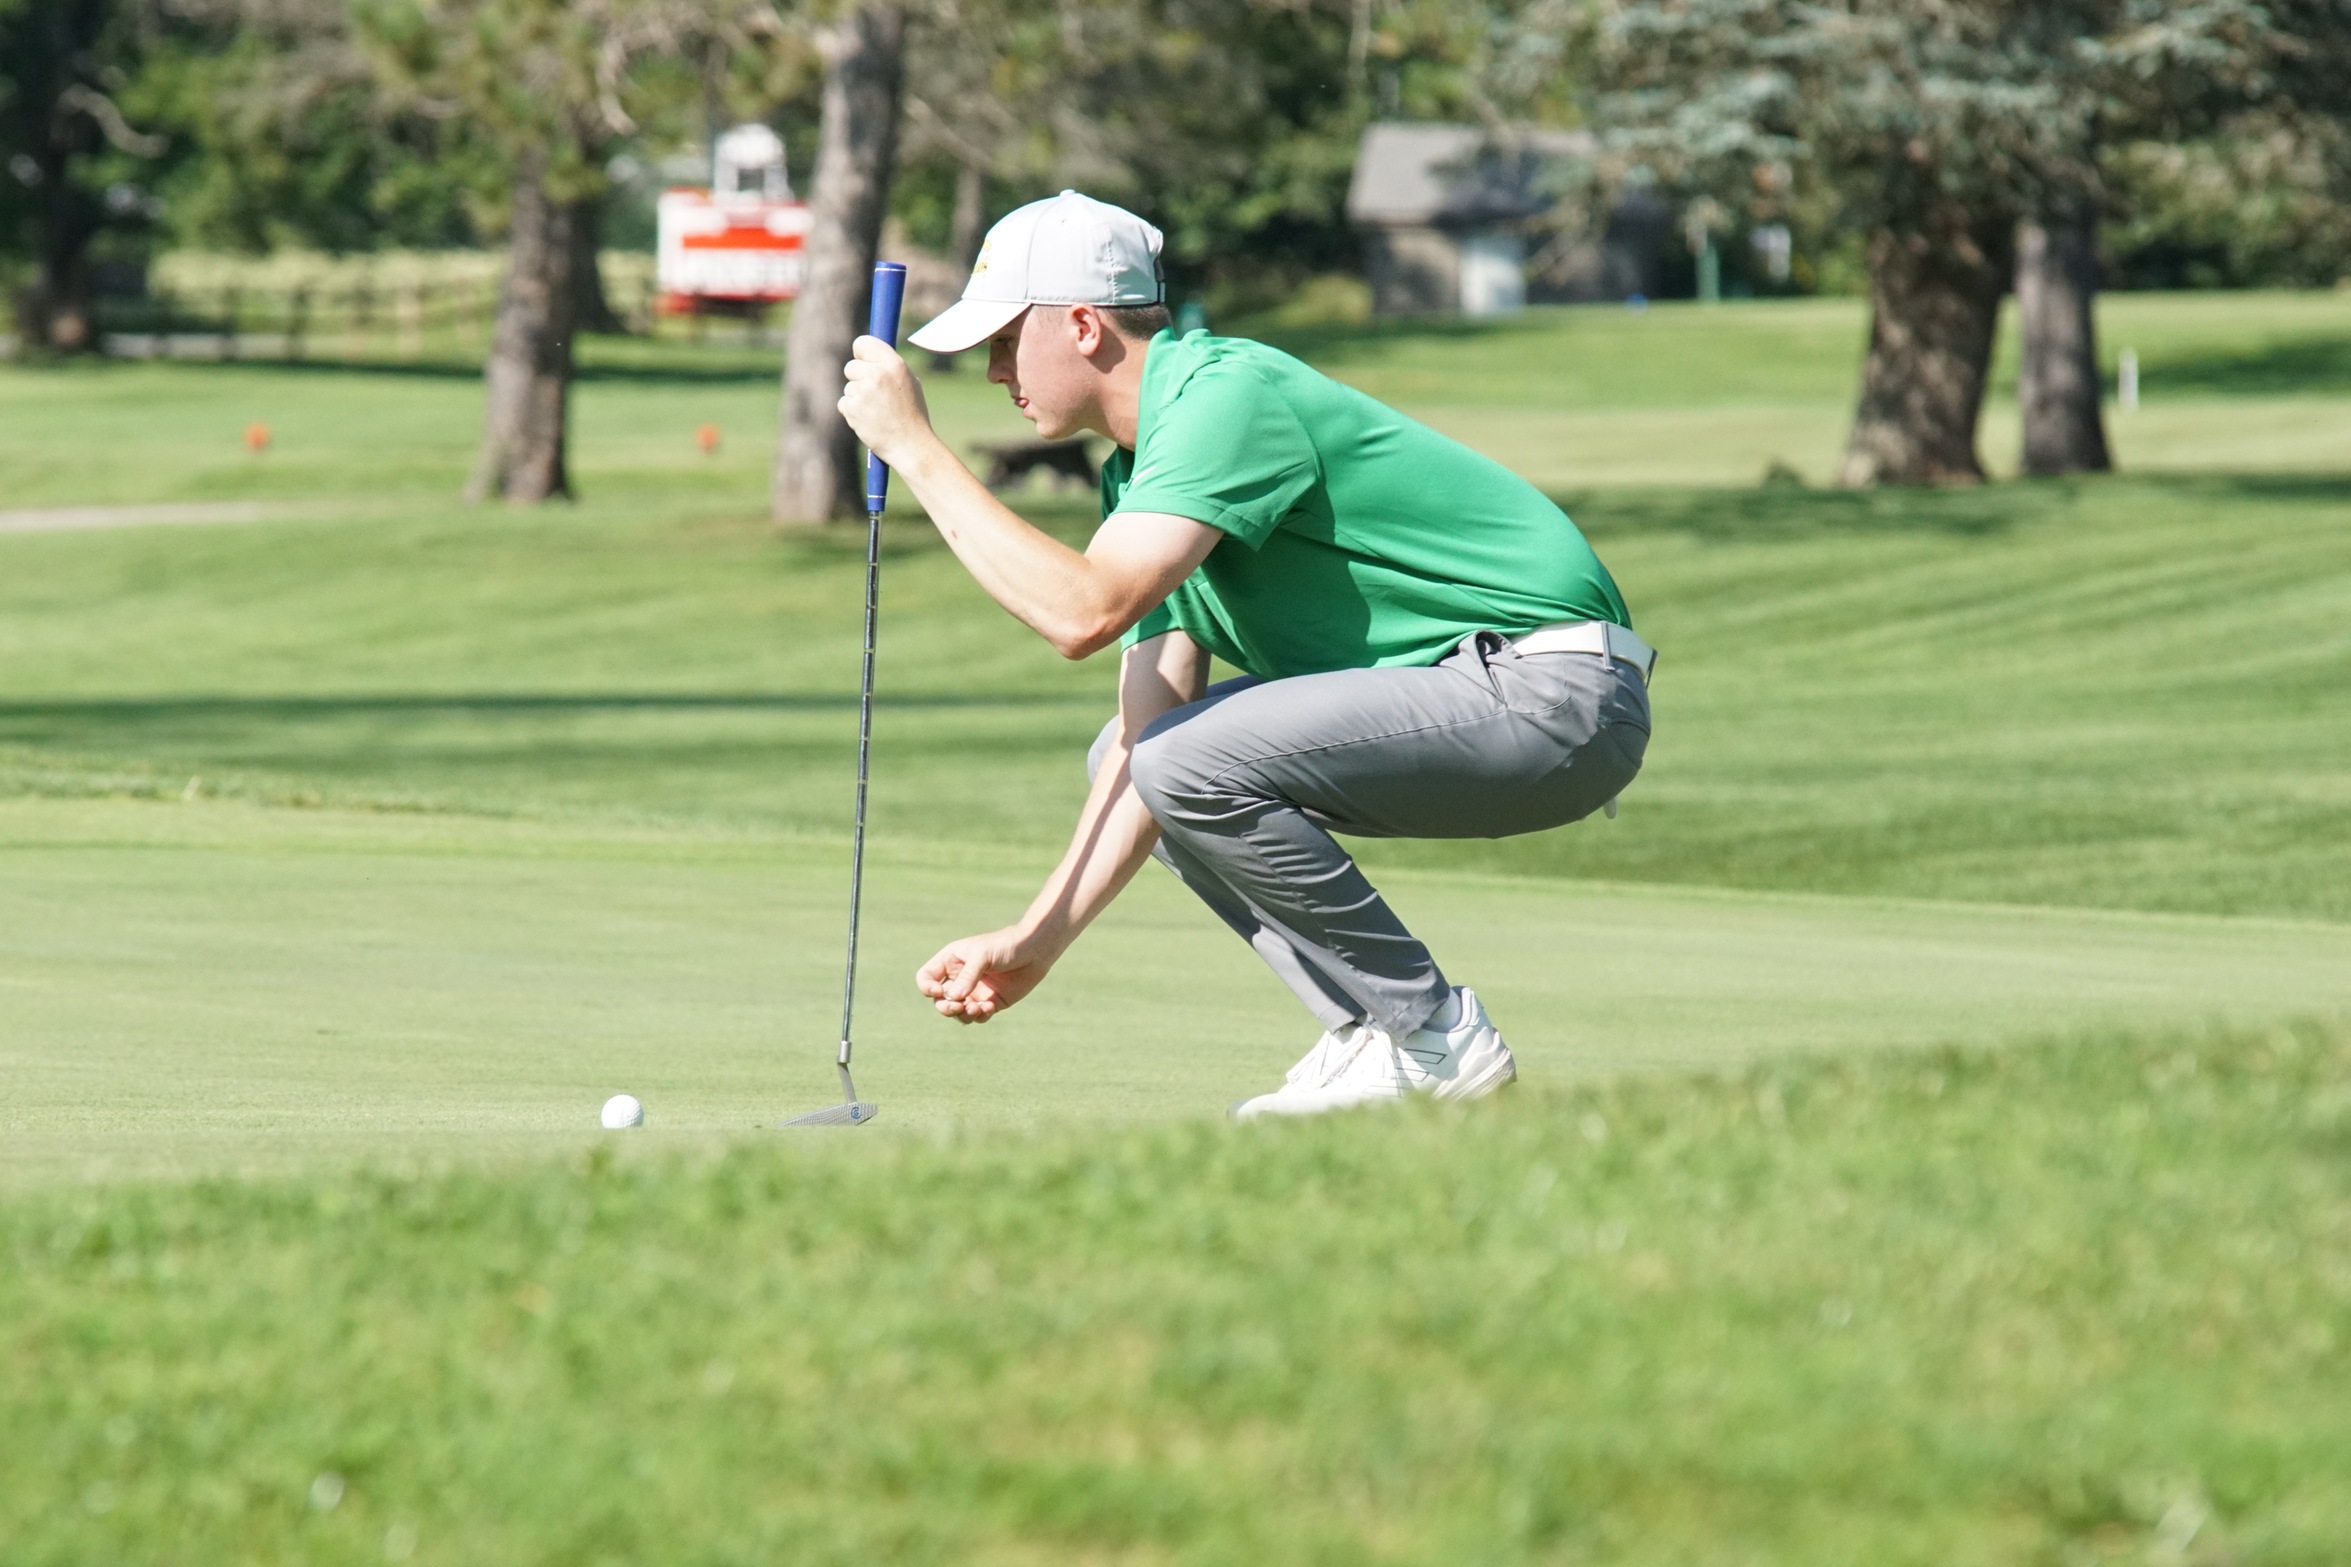 Delhi Golf's big second day propels them to third at Oswego Fall Invite